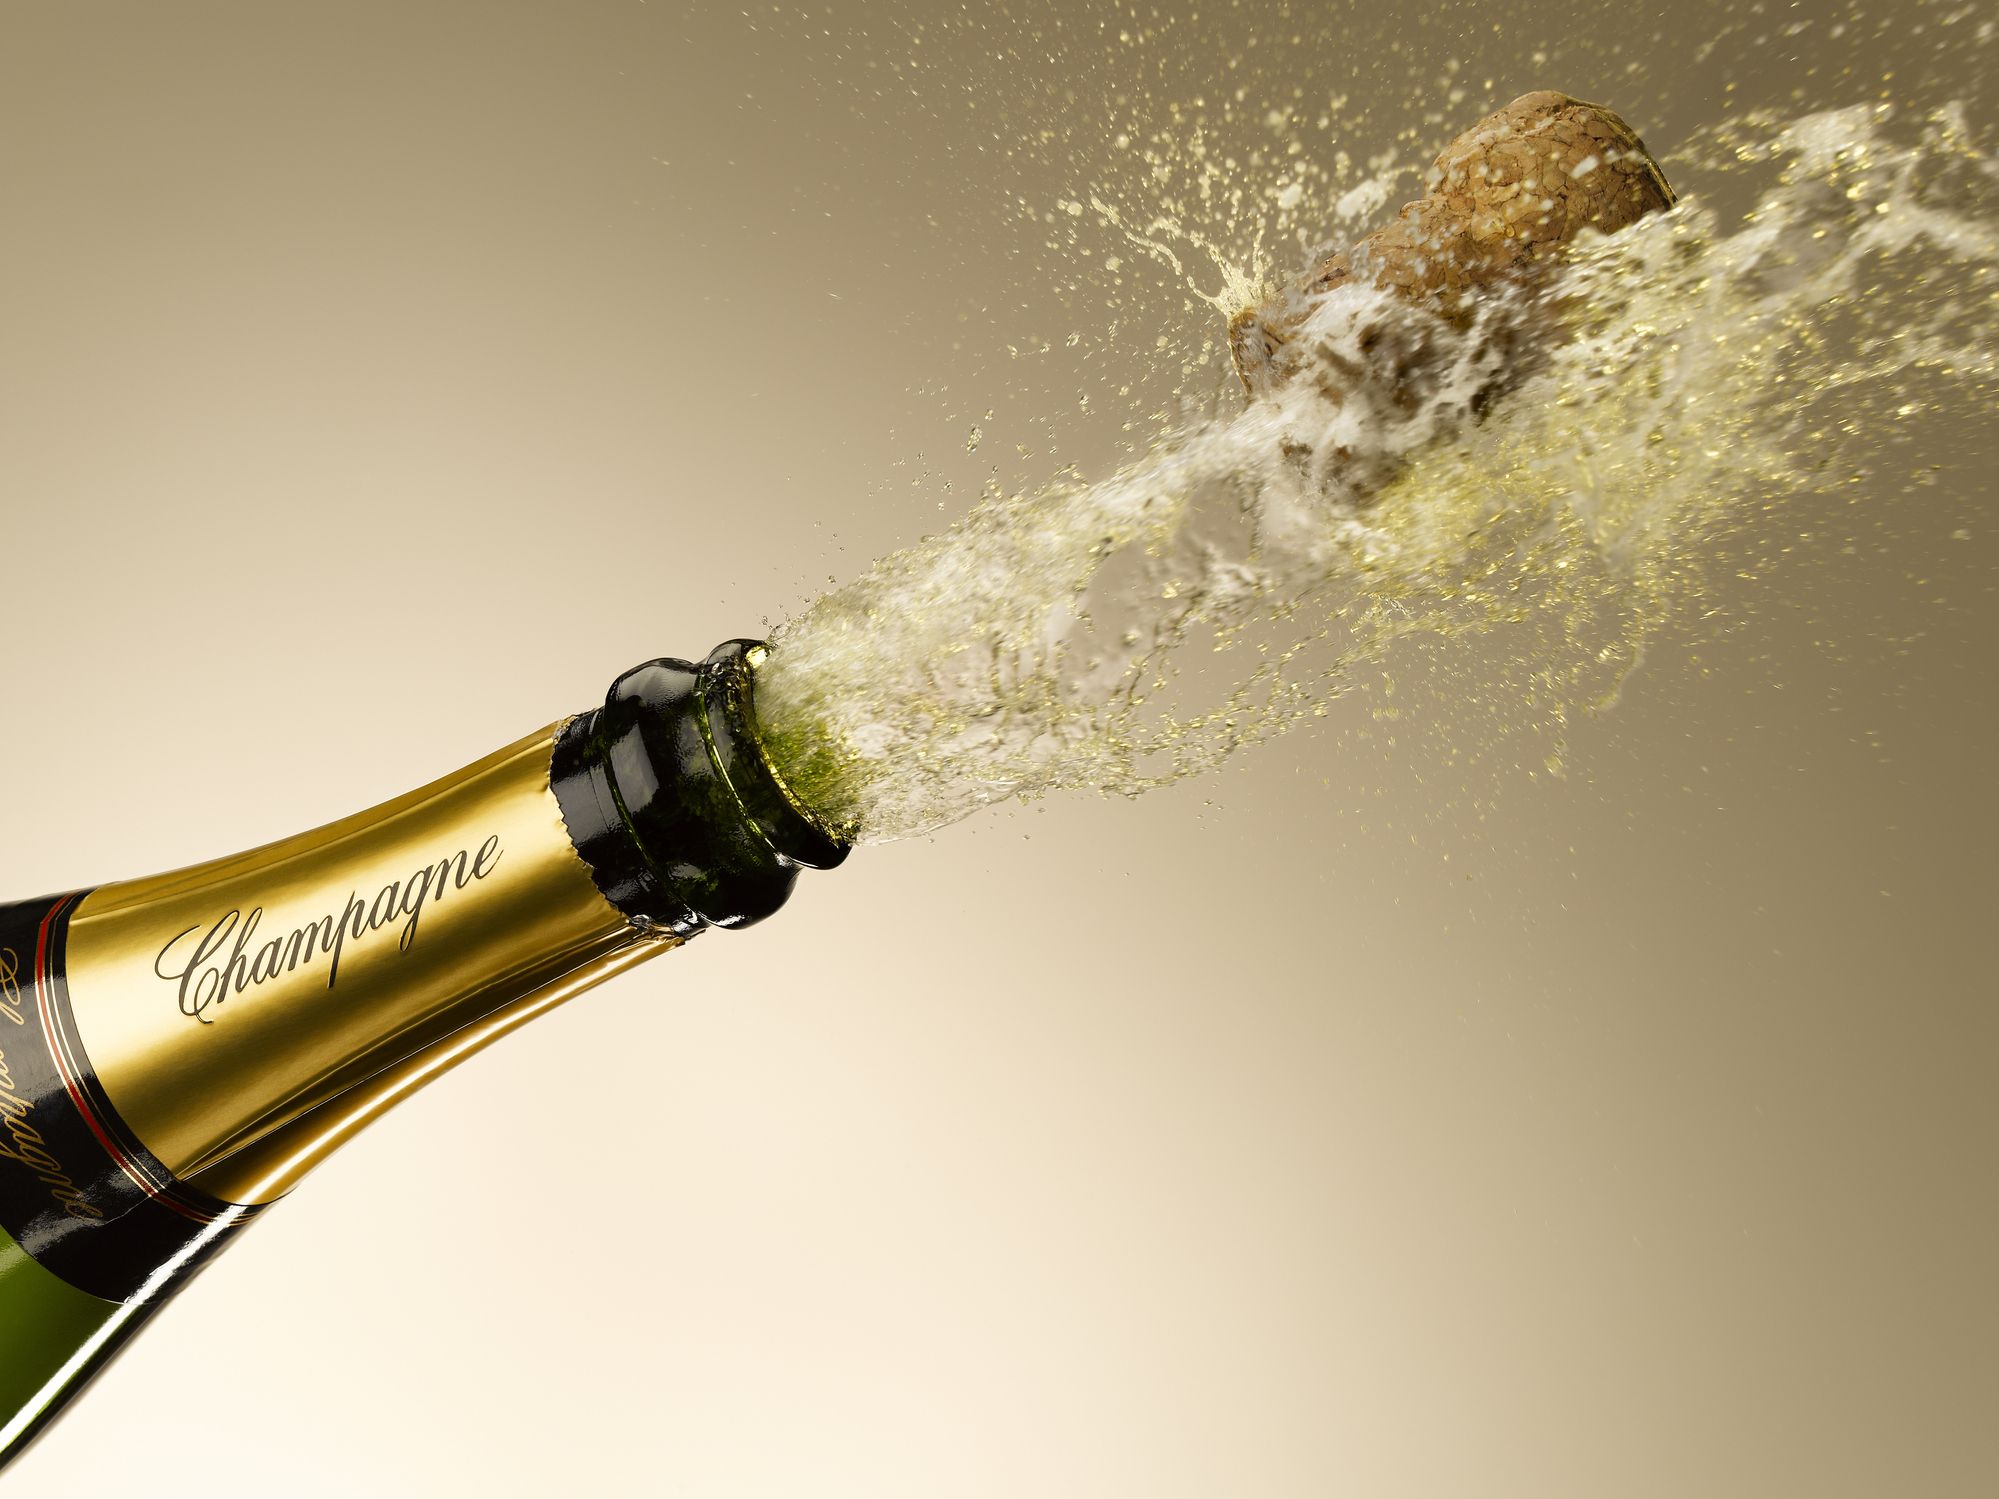 champagne-and-cork-exploding-from-bottle-royalty-free-image-1654271963.jpg